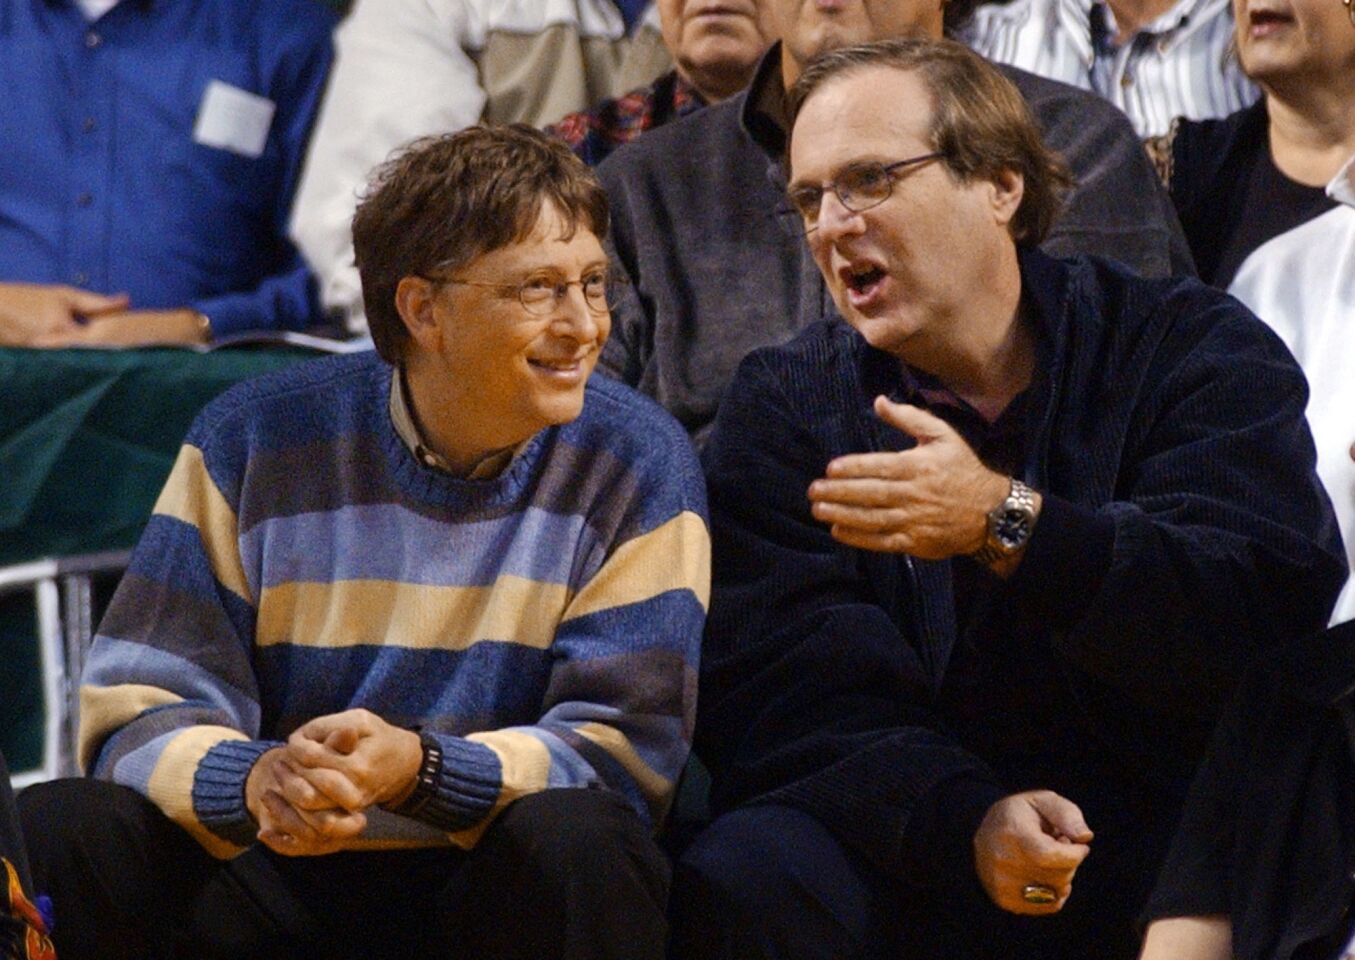 Microsoft Chairman Bill Gates, left, chats with Portland Trail Blazers owner and former business partner Paul Allen during a game between the Trail Blazers and Seattle SuperSonics in Seattle on March 11, 2003.